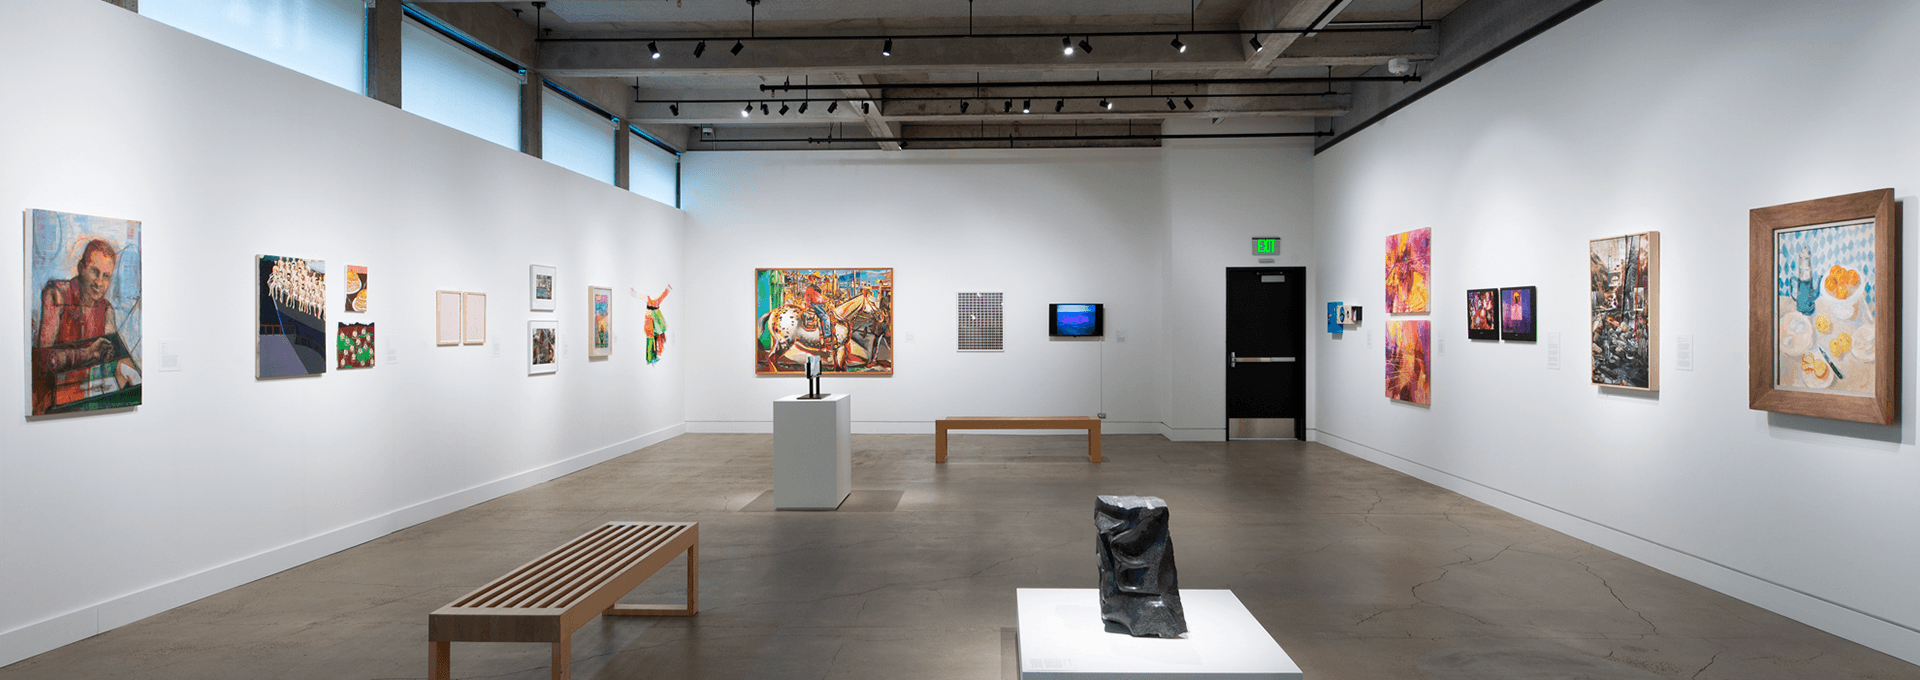 Installation view of Art for All at the Jordan Schnitzer Museum of Art